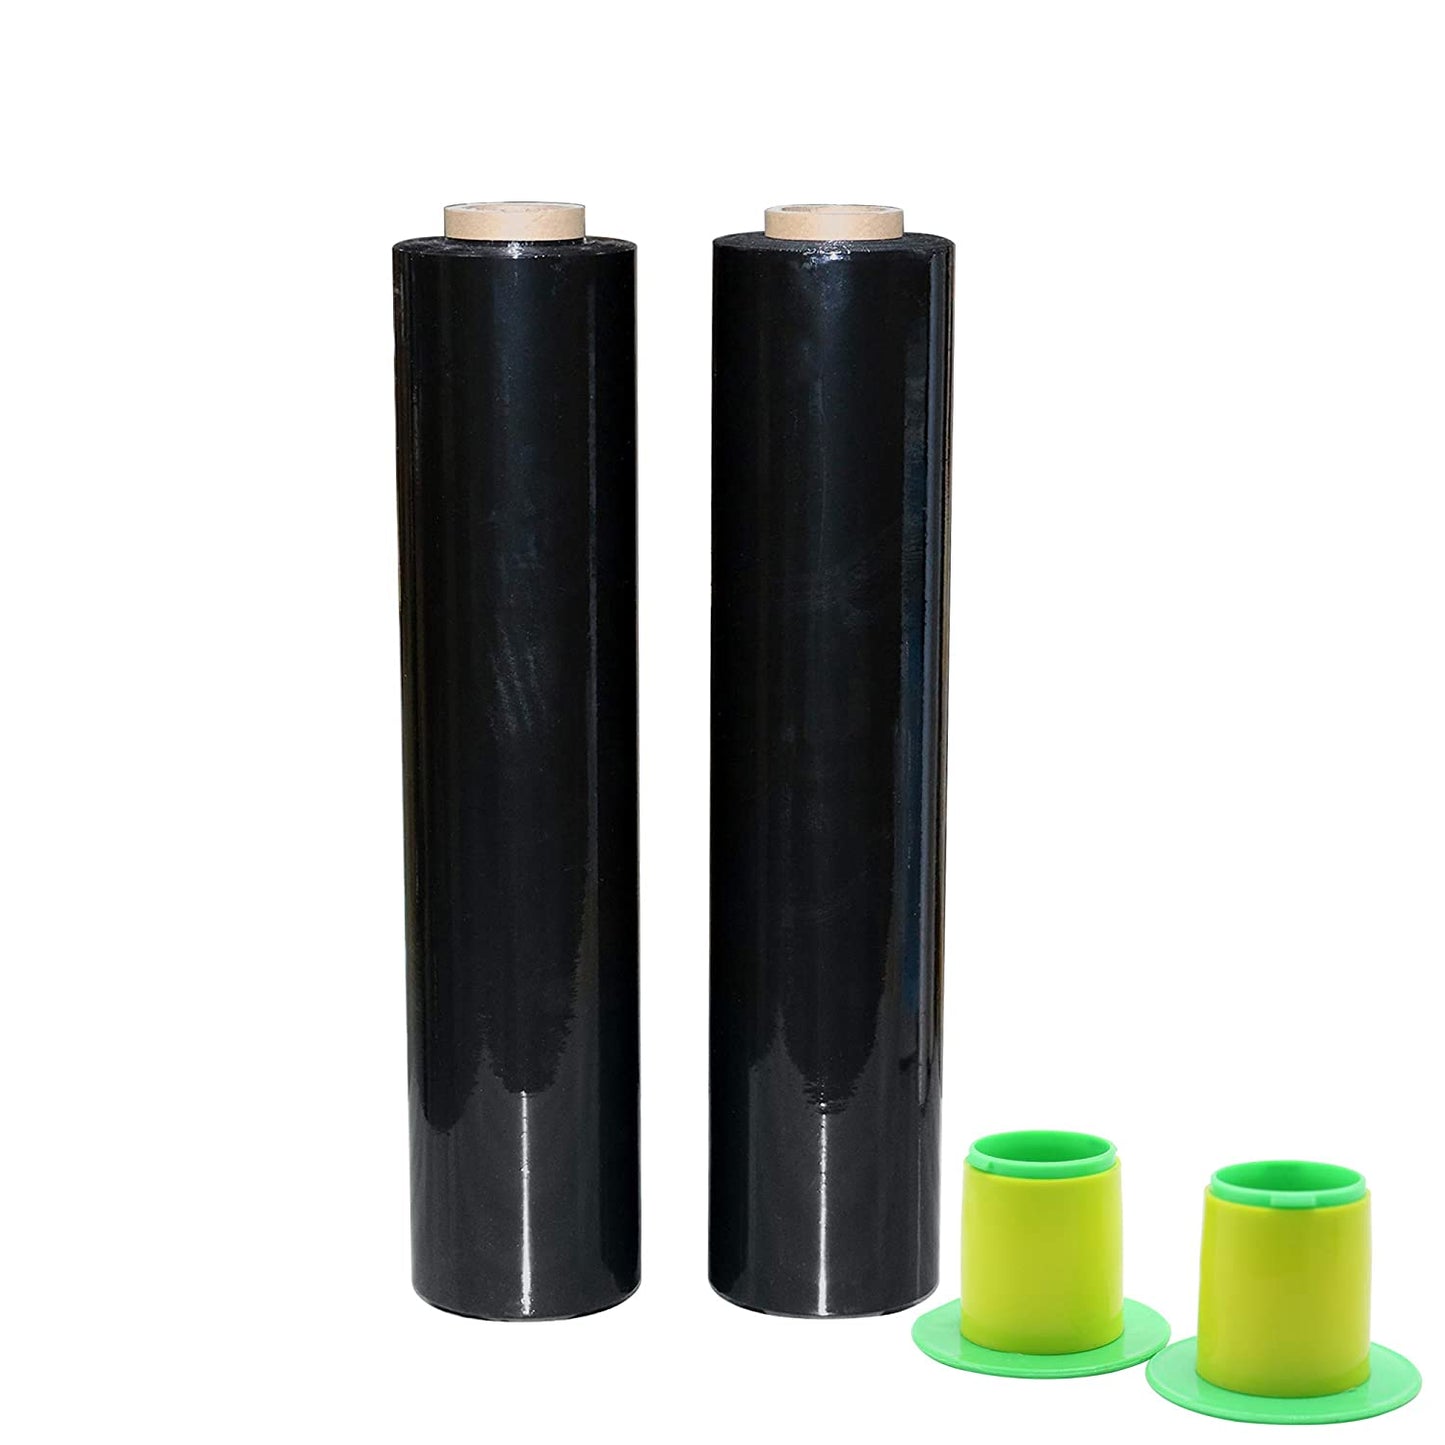 2 Pack Industrial Black Pallet Stretch Wrap Cling Film 20Mic X 400Mm X 260M with Plastic Rolling Handle.Durable Self-Adhering Packing,Moving,Packaging,Heavy Duty Shrink Film -